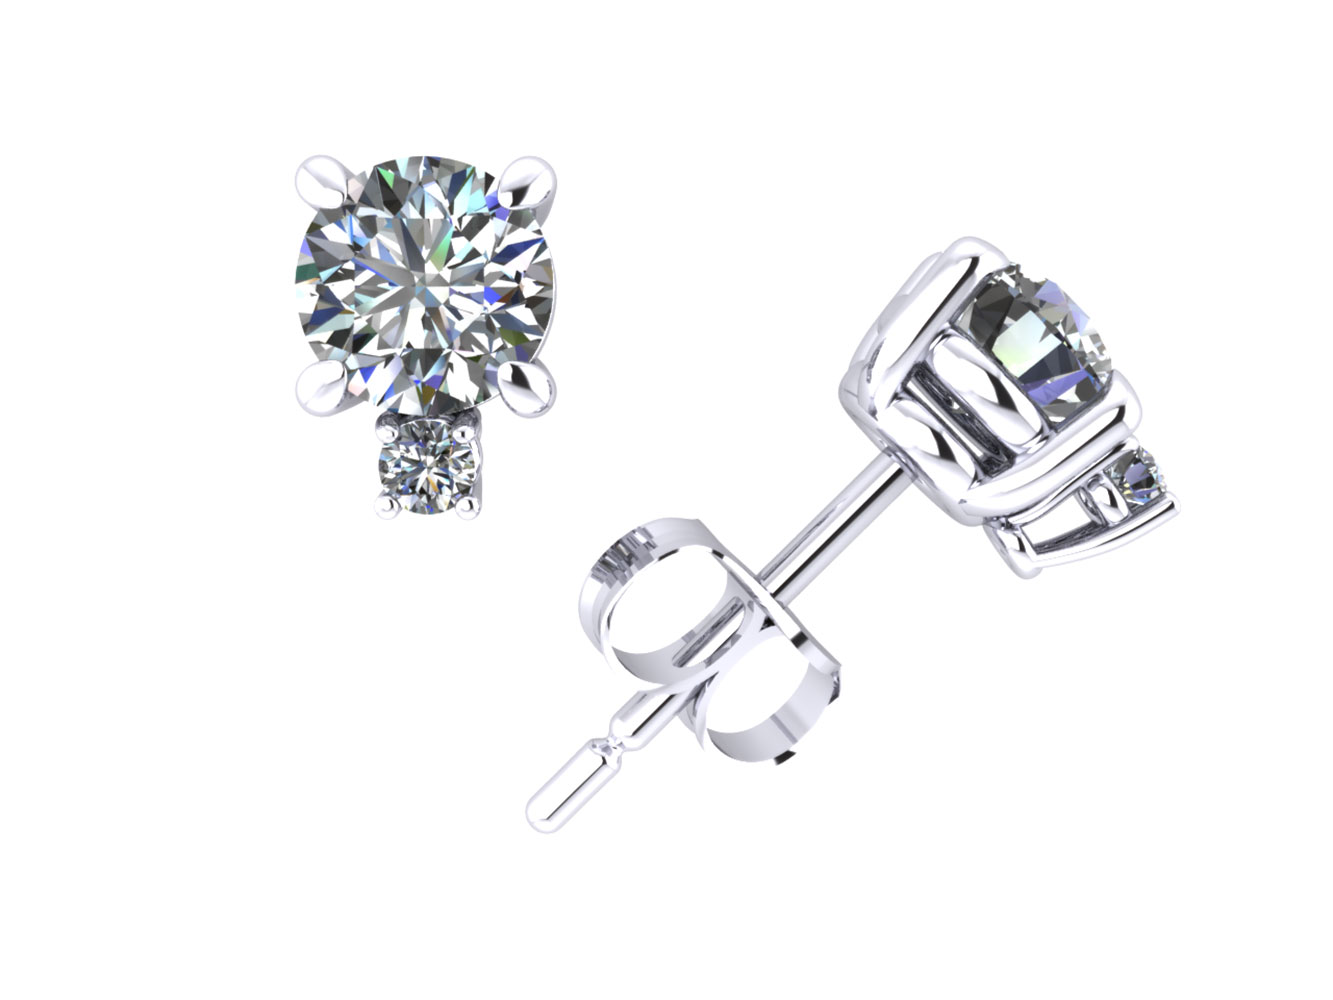 Jewel We Sell 0.53Carat Round Diamond Stud Earrings with Accents 14k White or Yellow Gold Prong G SI1